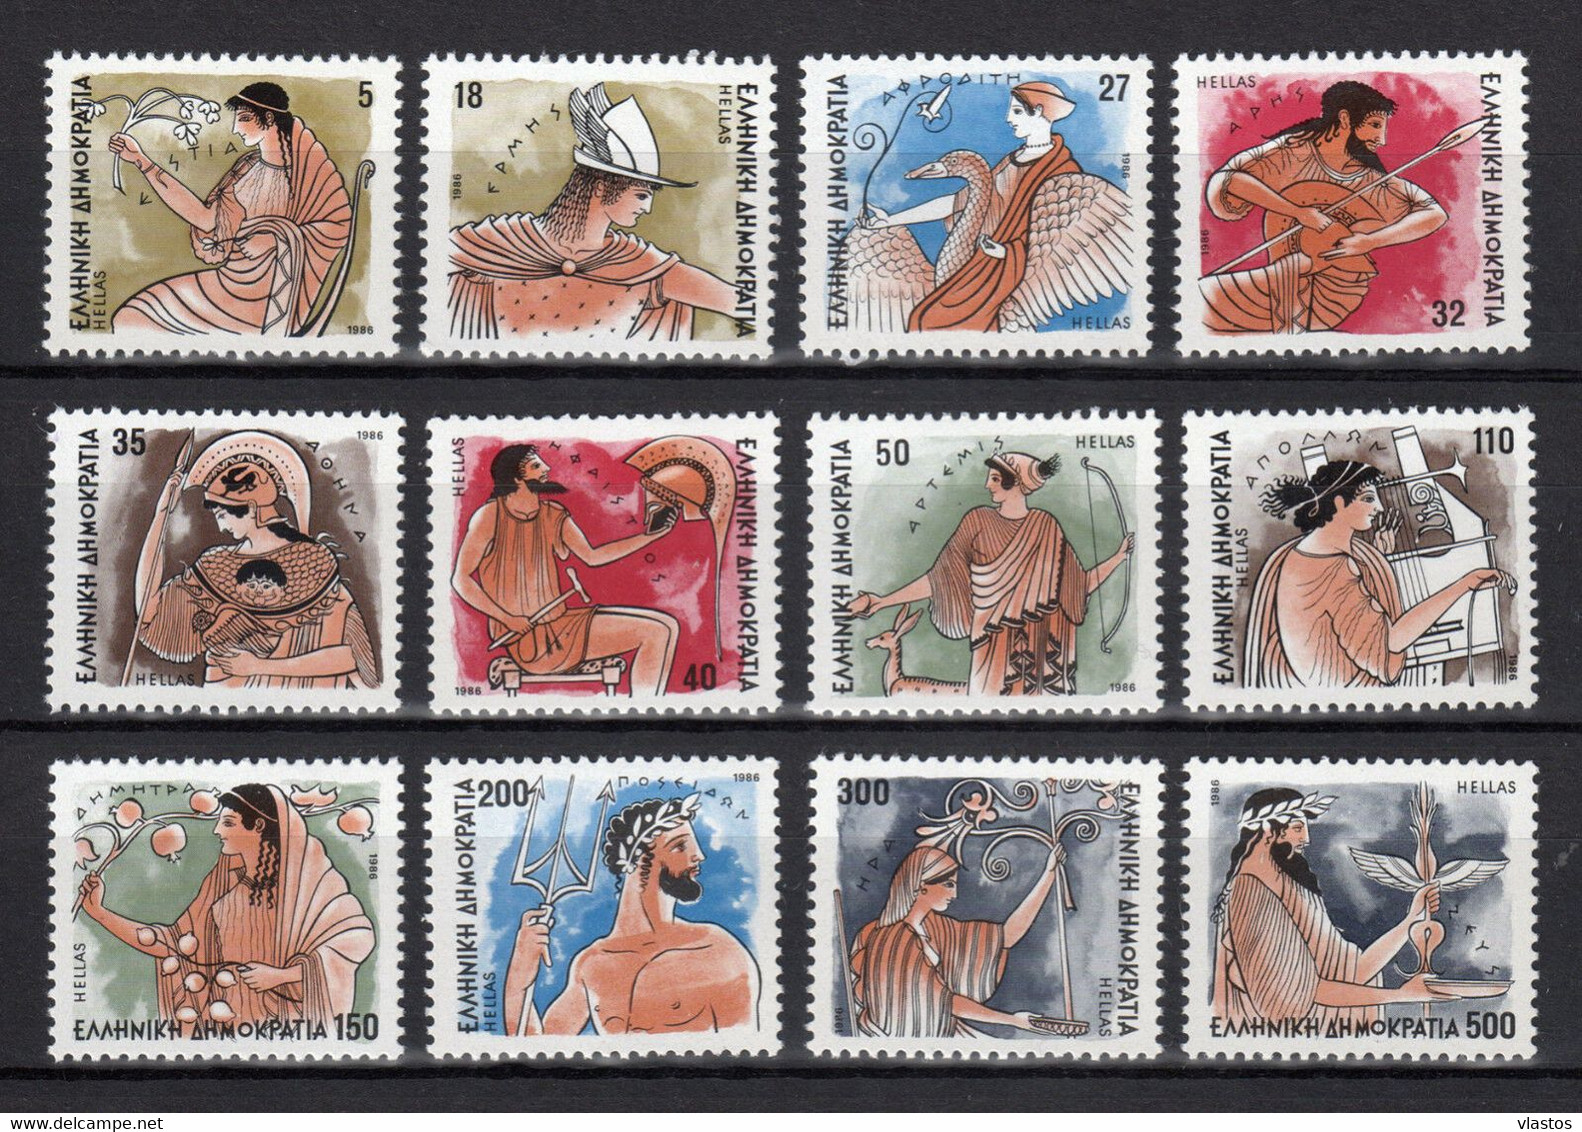 GREECE 1986 COMPLETE YEAR - PERFORATED+IMPERFORATED STAMPS MNH - Années Complètes